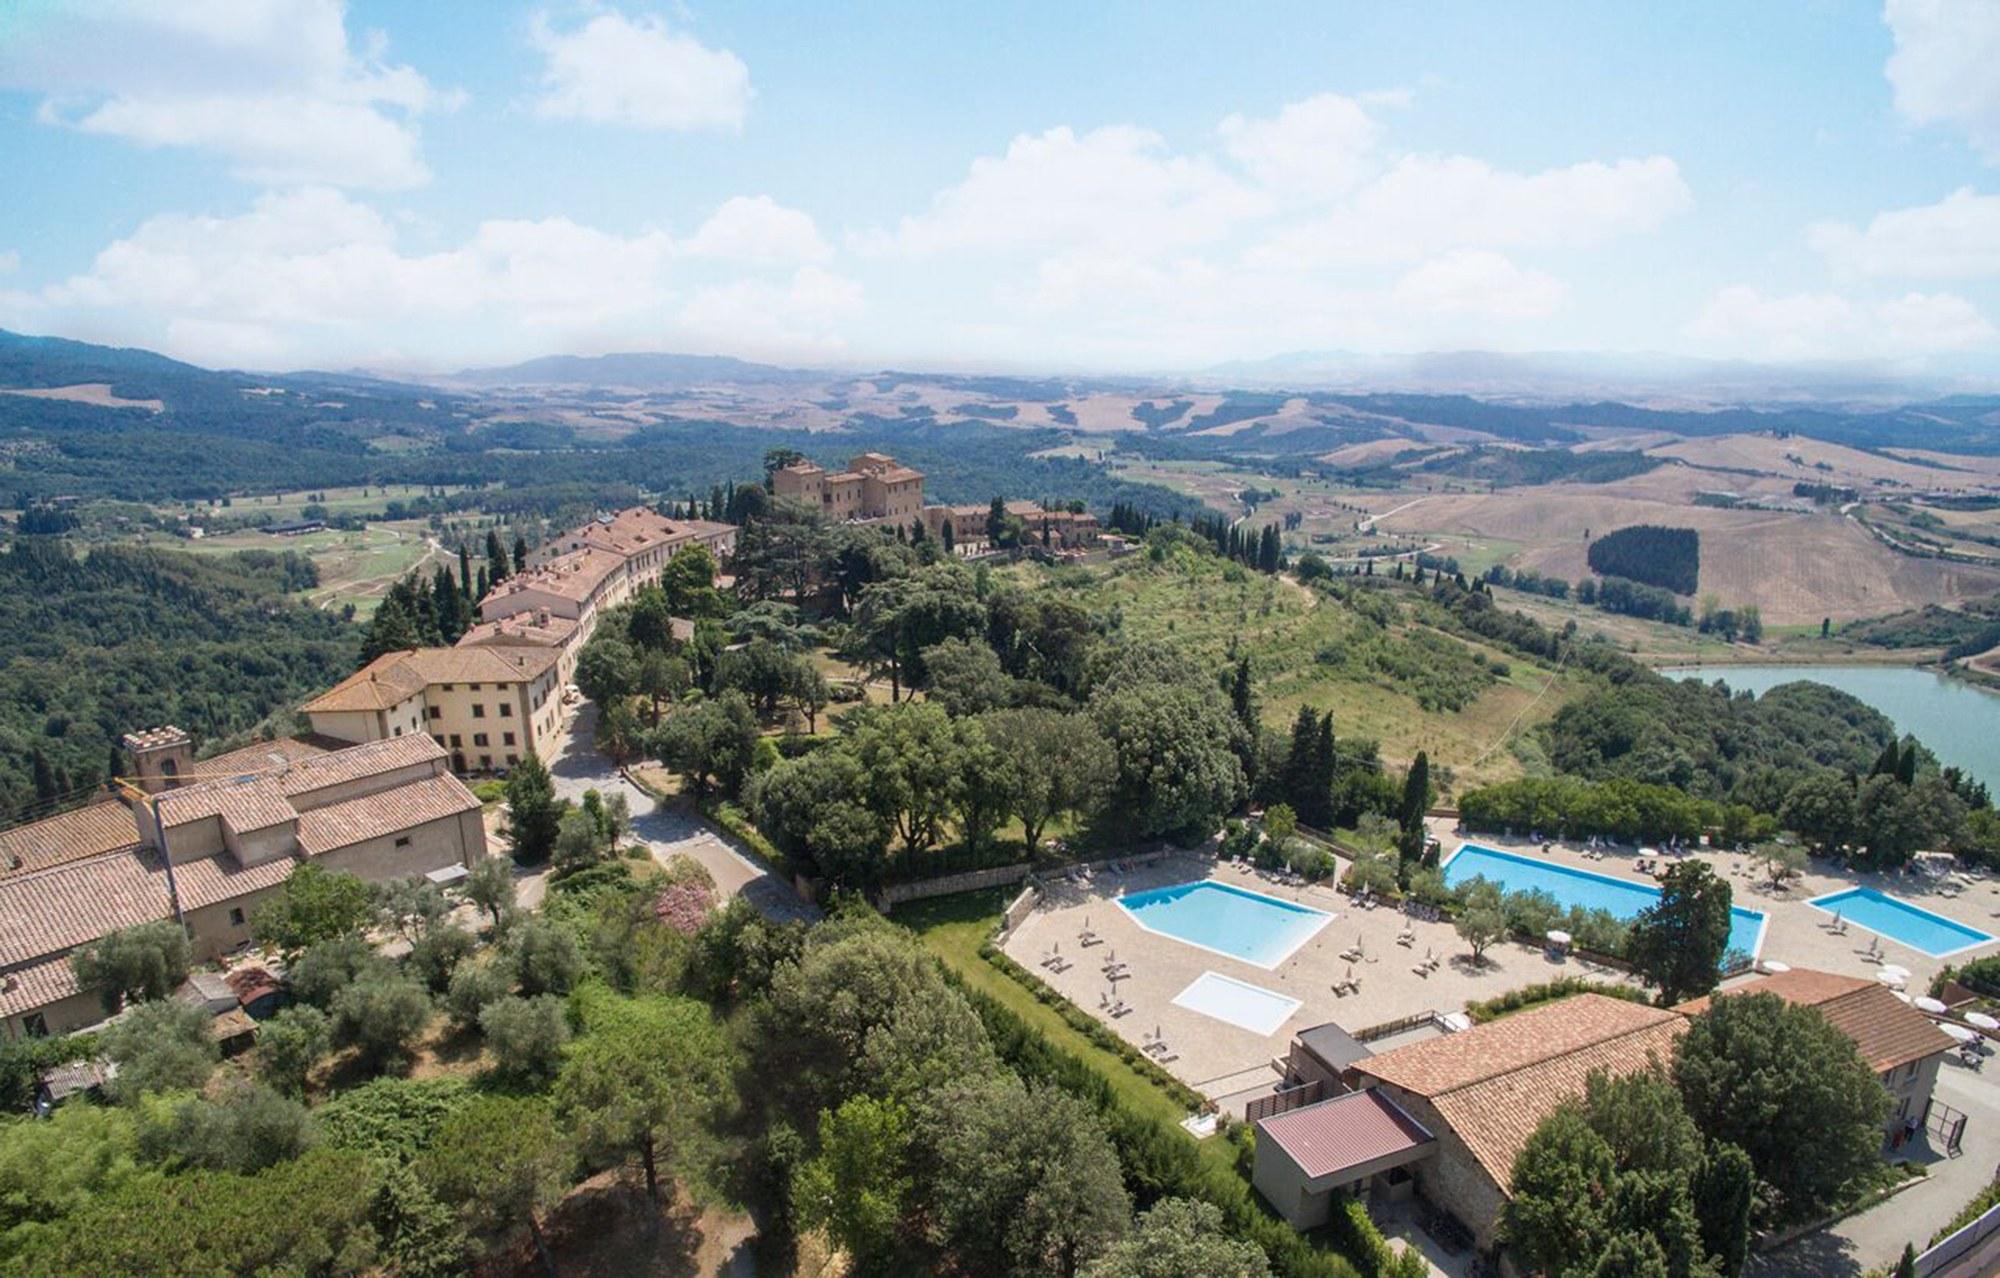 View Toscana Resort Castelfalfi's picturesque setting in dramatic Tuscany.